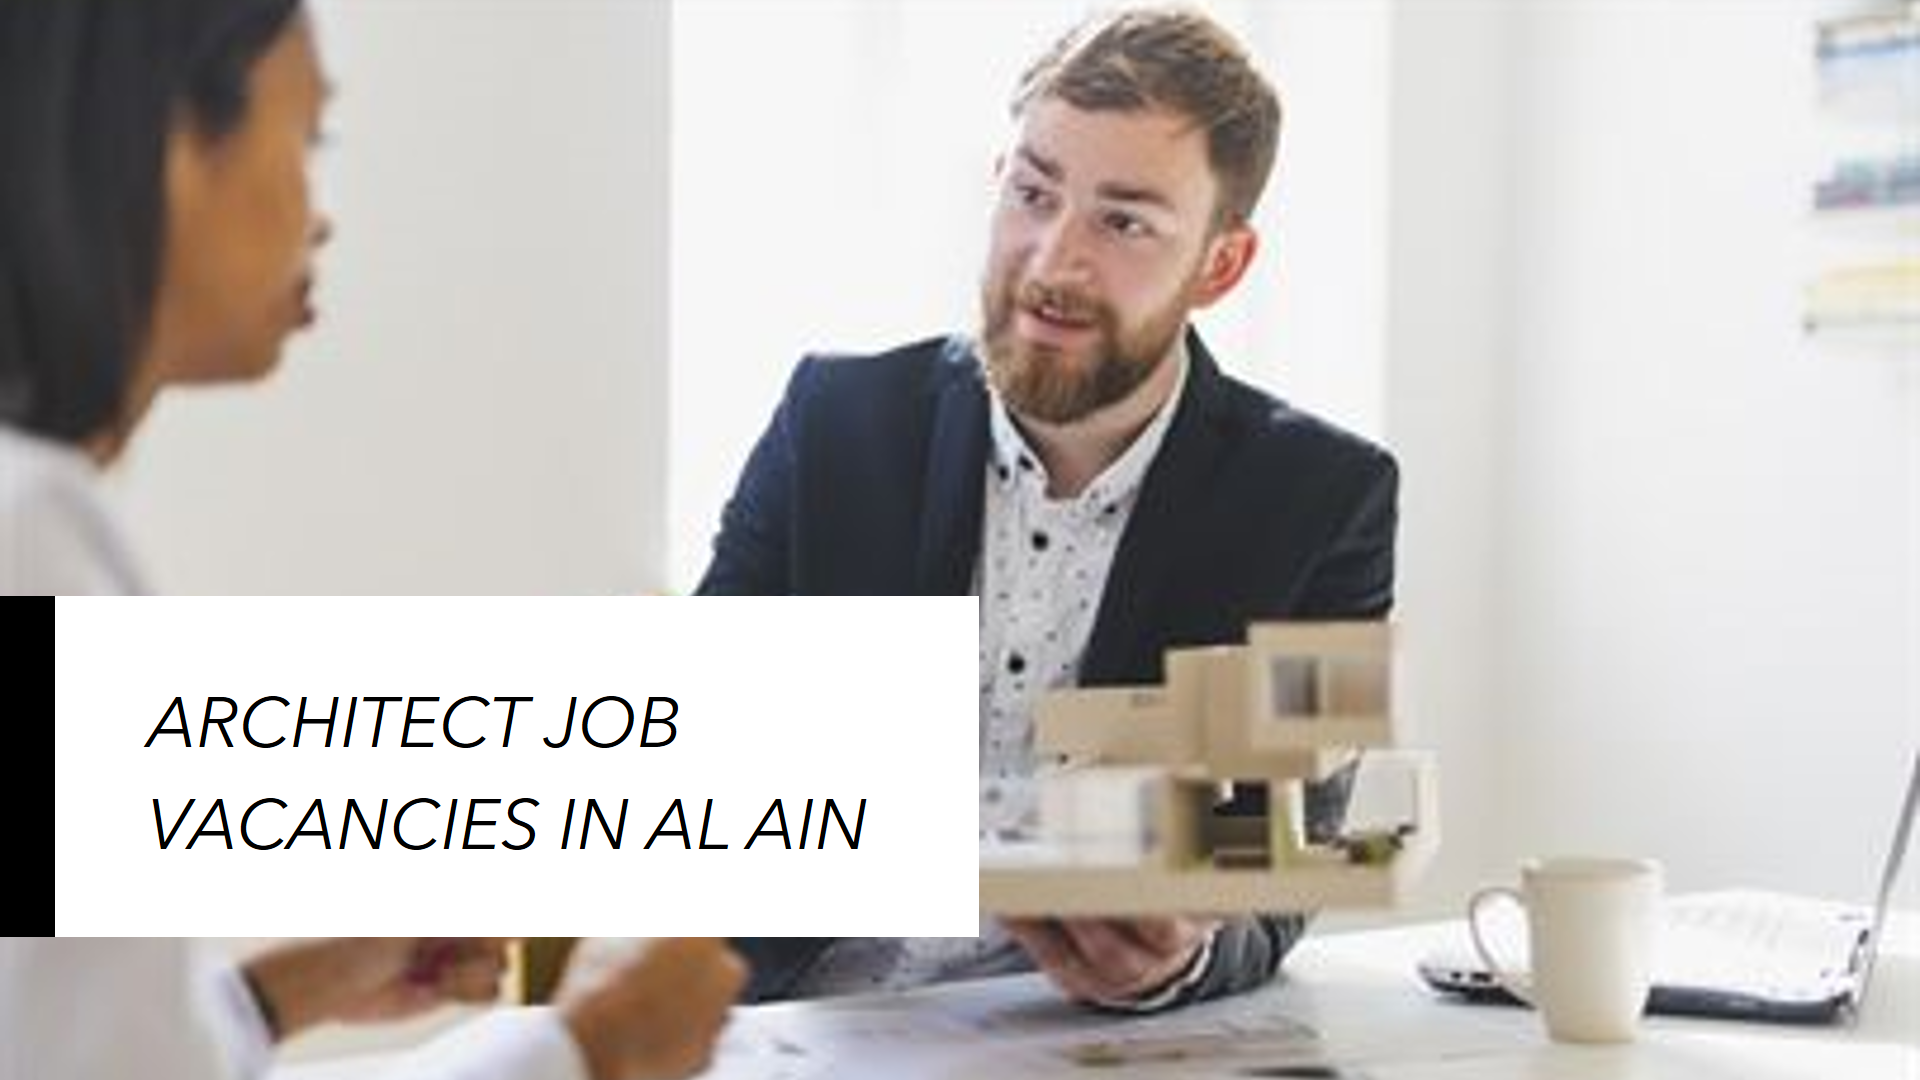 Architect job vacancies in Al Ain for all nationalities